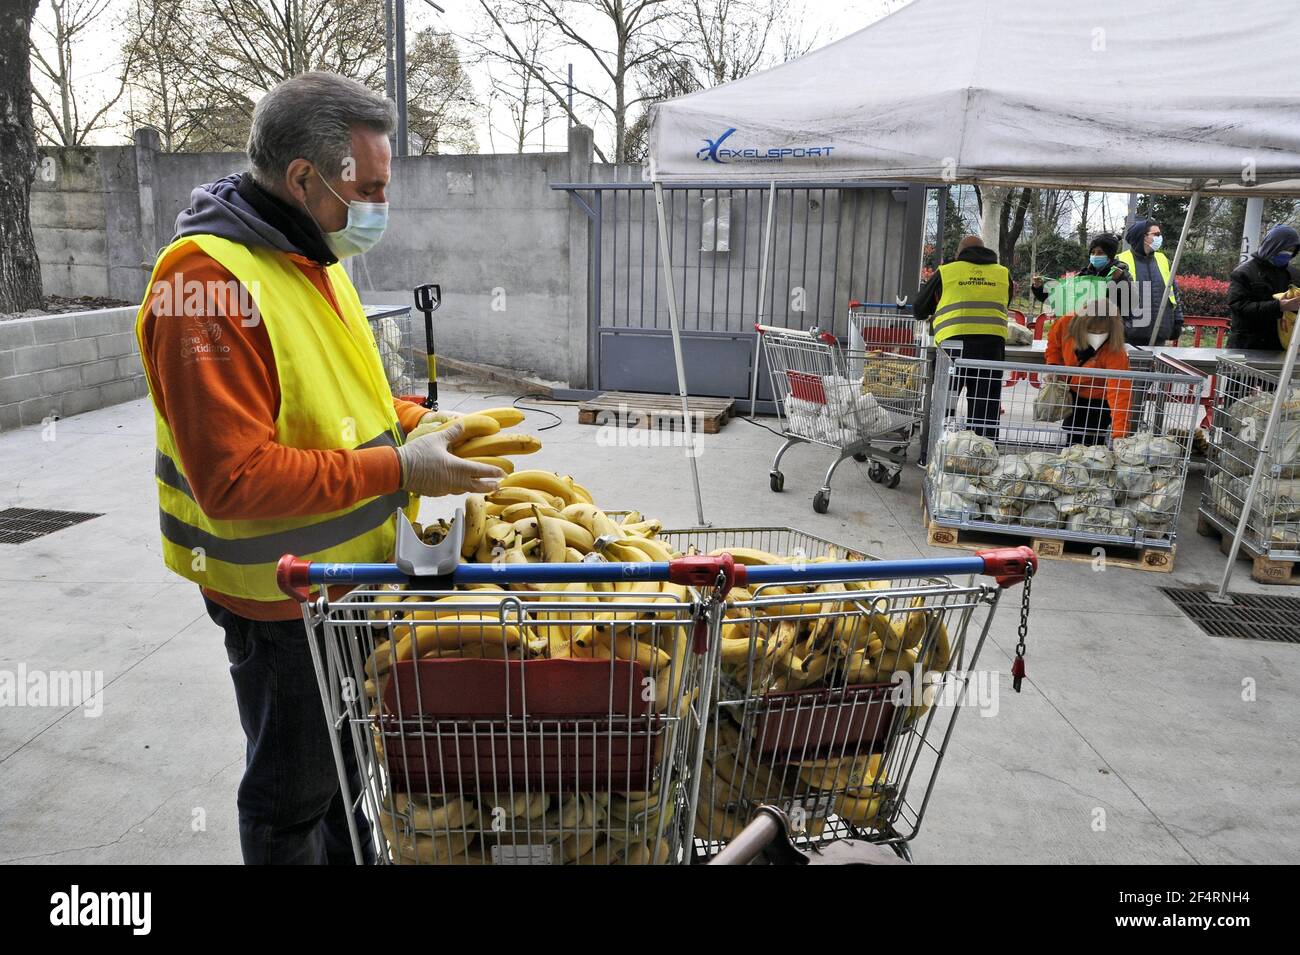 Milan (Italy), the non-profit organisation Pane Quotidiano (Daily Bread) distributes essential foodstuffs to people in economic difficulty due to the crisis caused by the Coronavirus epidemic. More and more social groups are affected, and every day the queue gets longer. Stock Photo